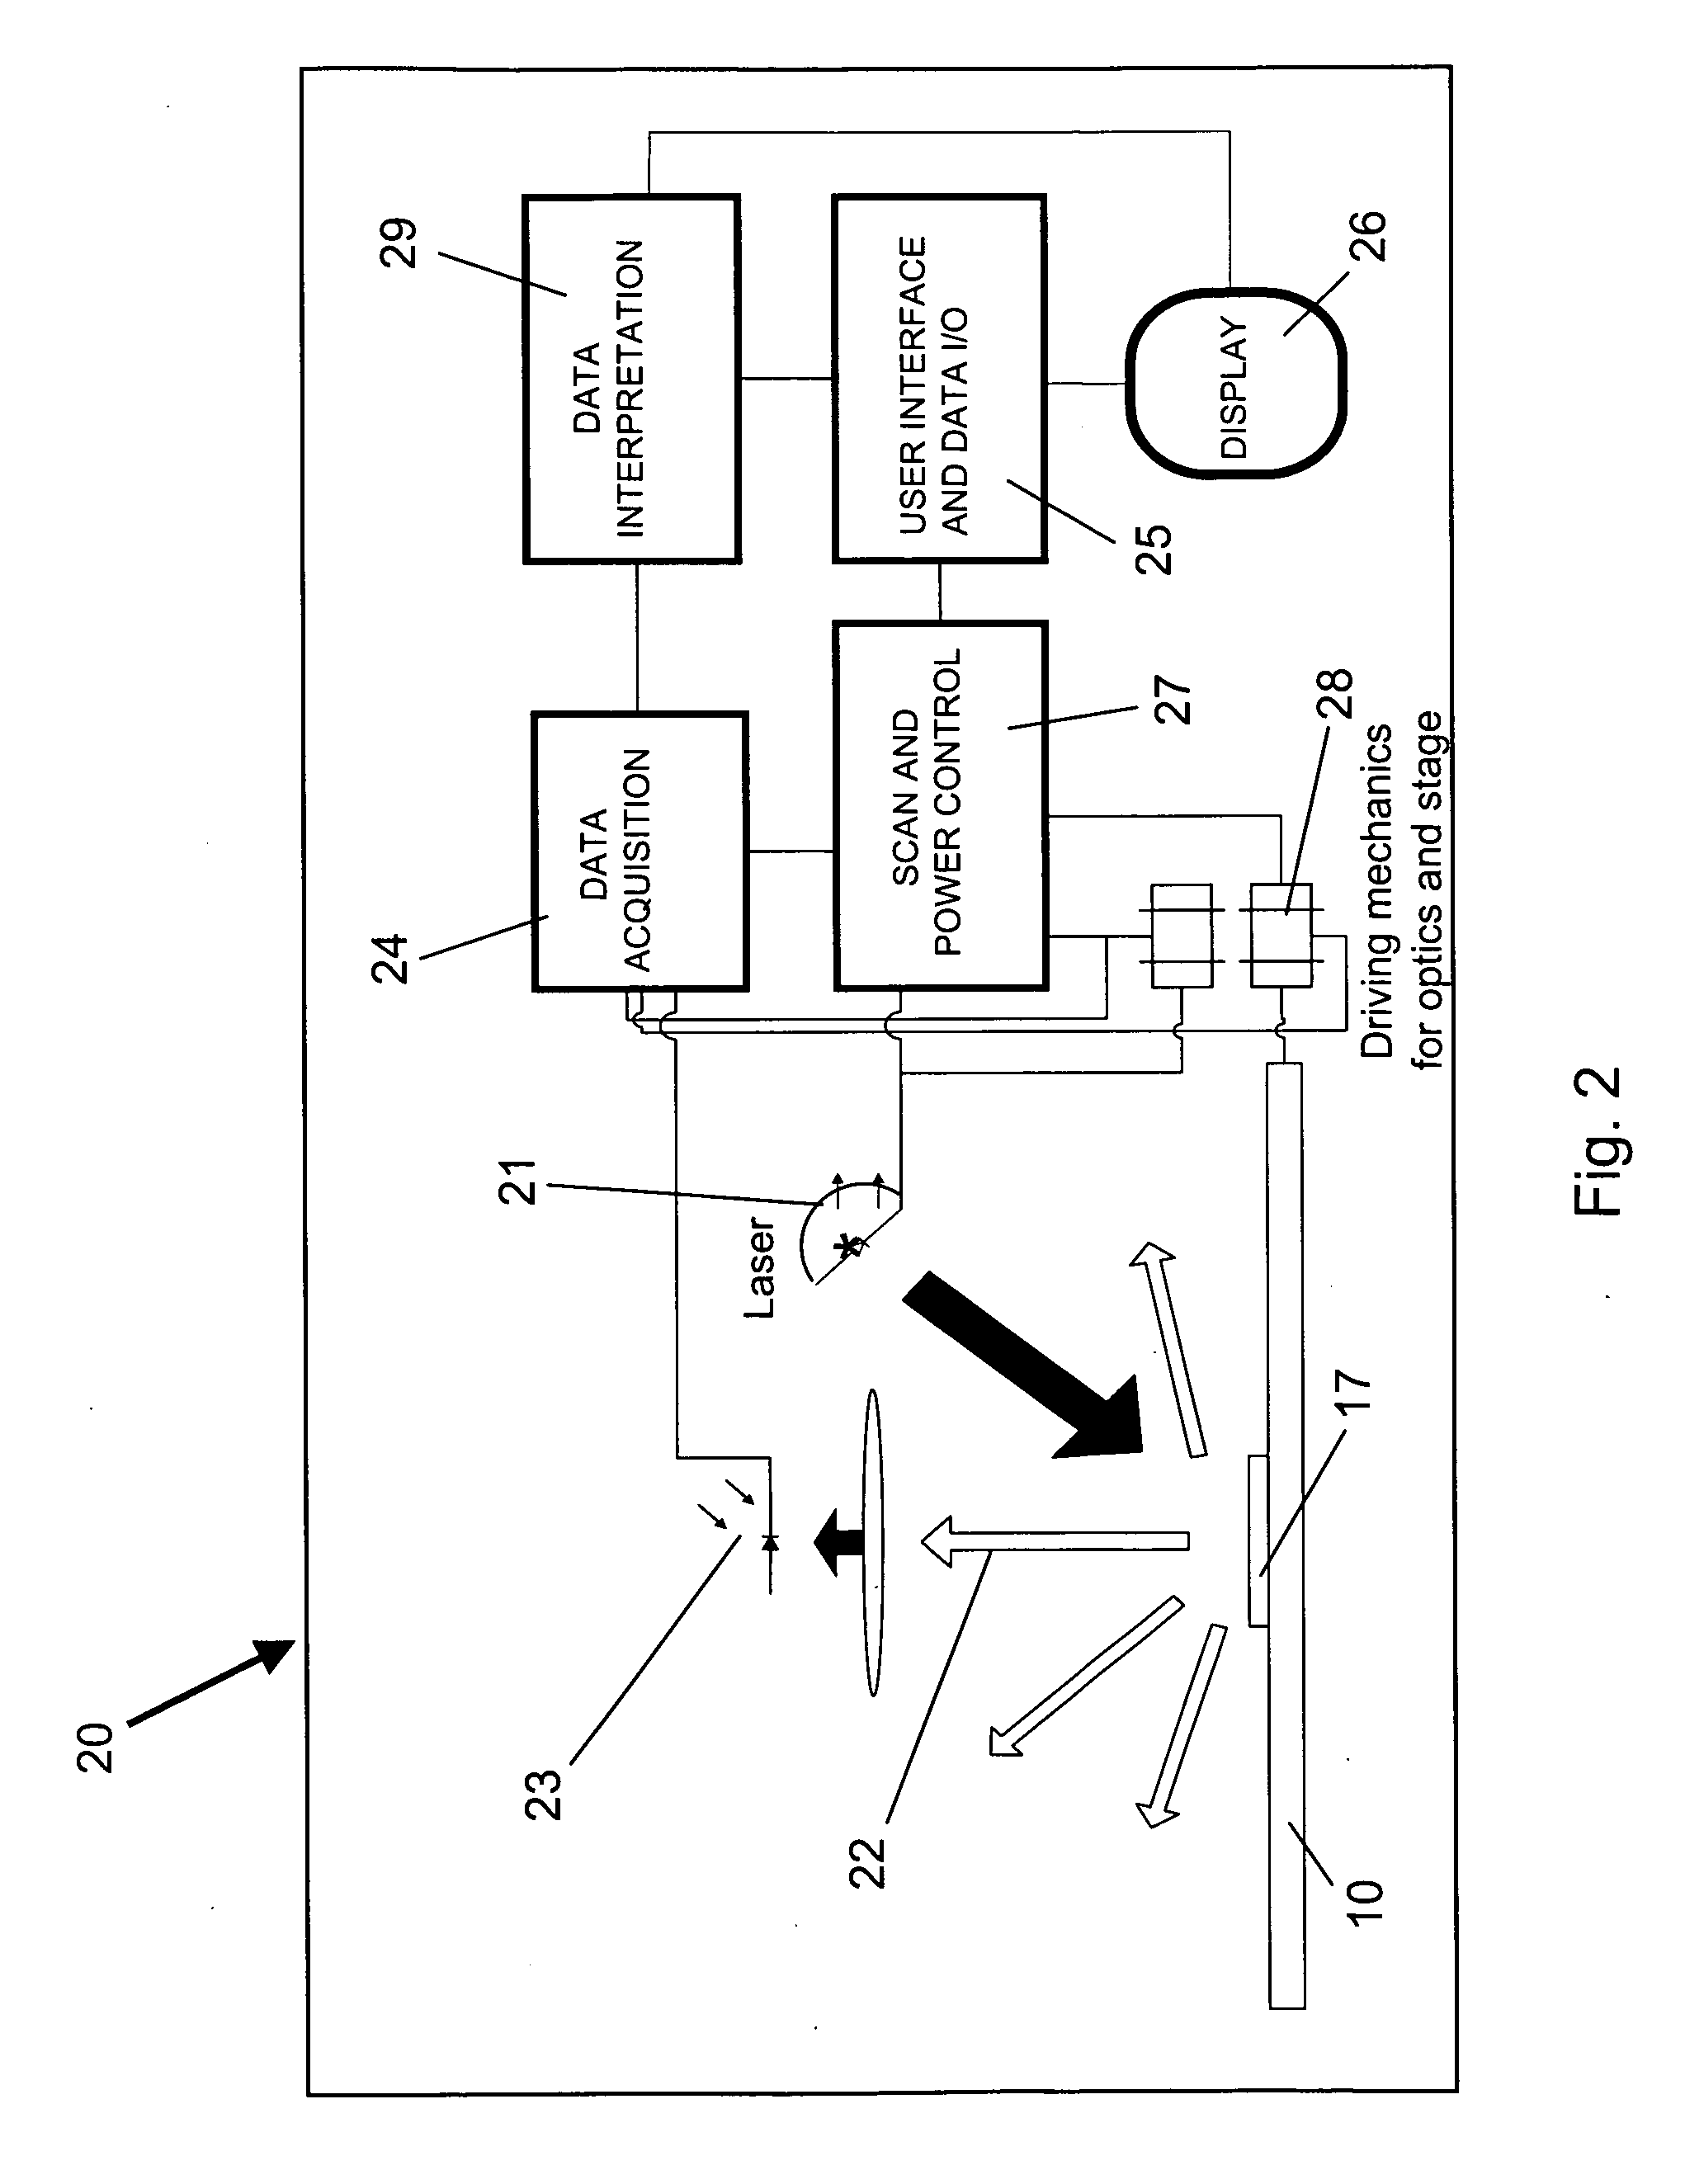 Analytical cartridge with fluid flow control